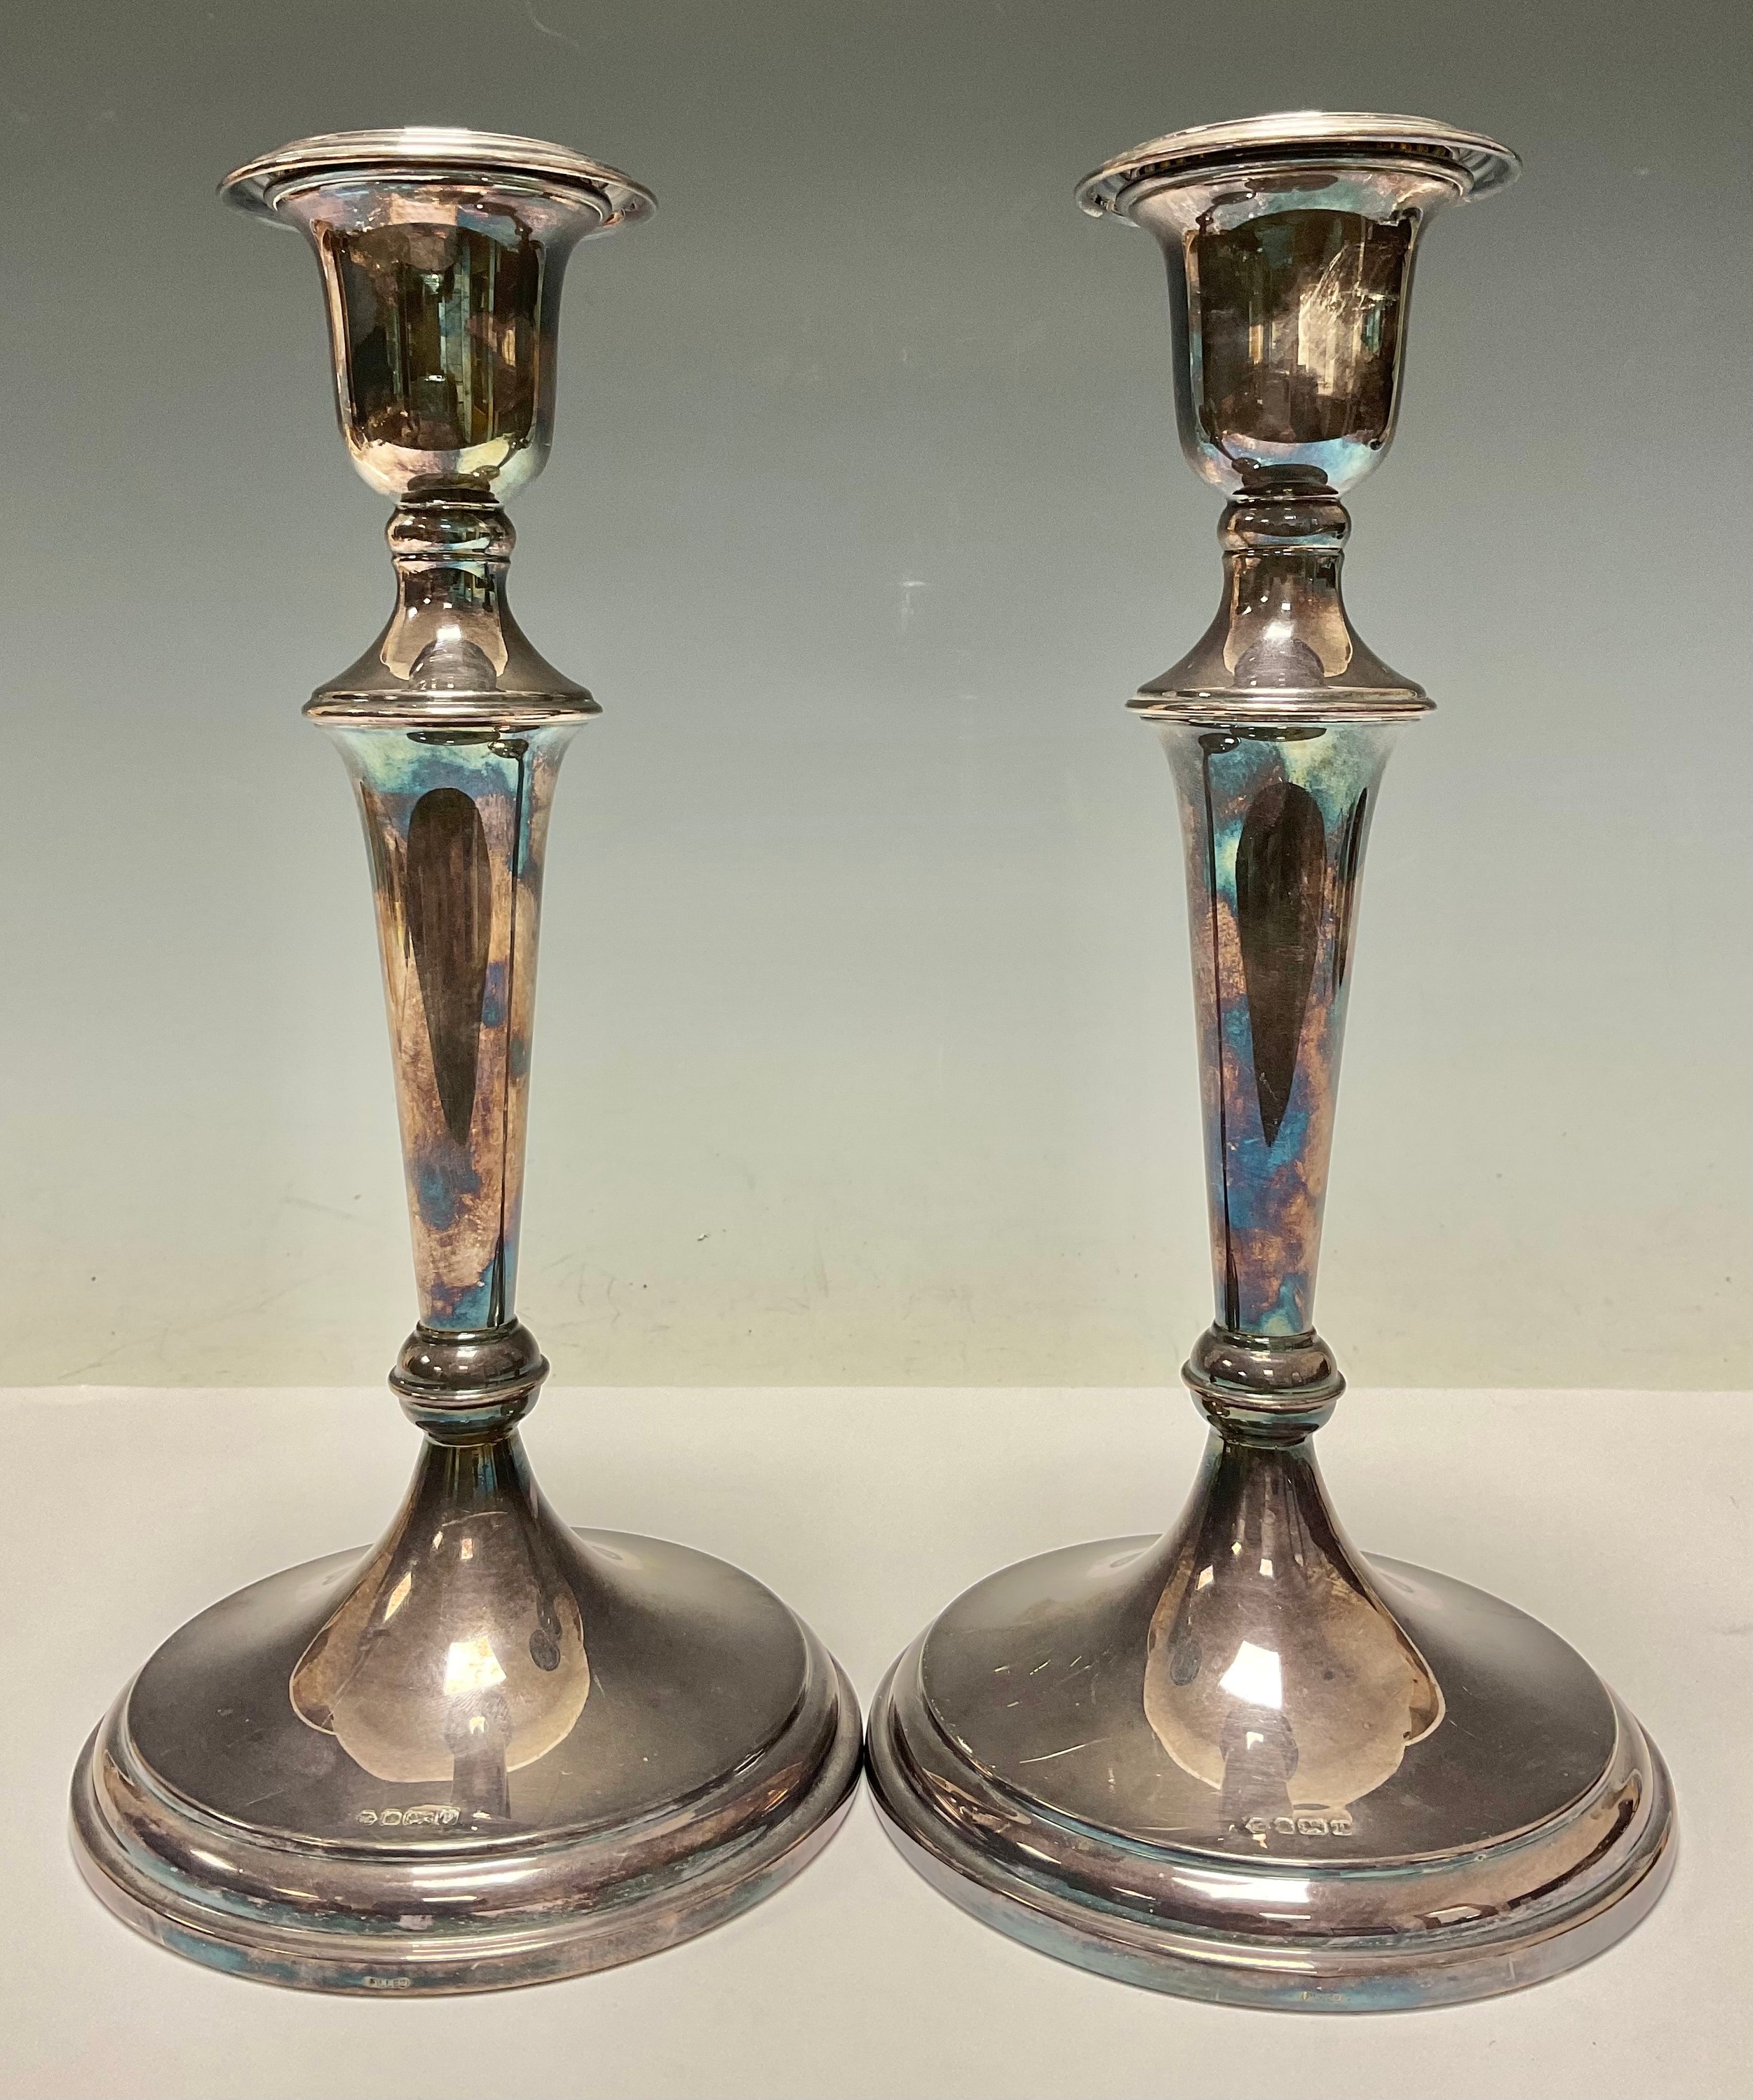 A pair of George III style silver round table candlesticks, knopped pillars, loaded, each 25cm high,